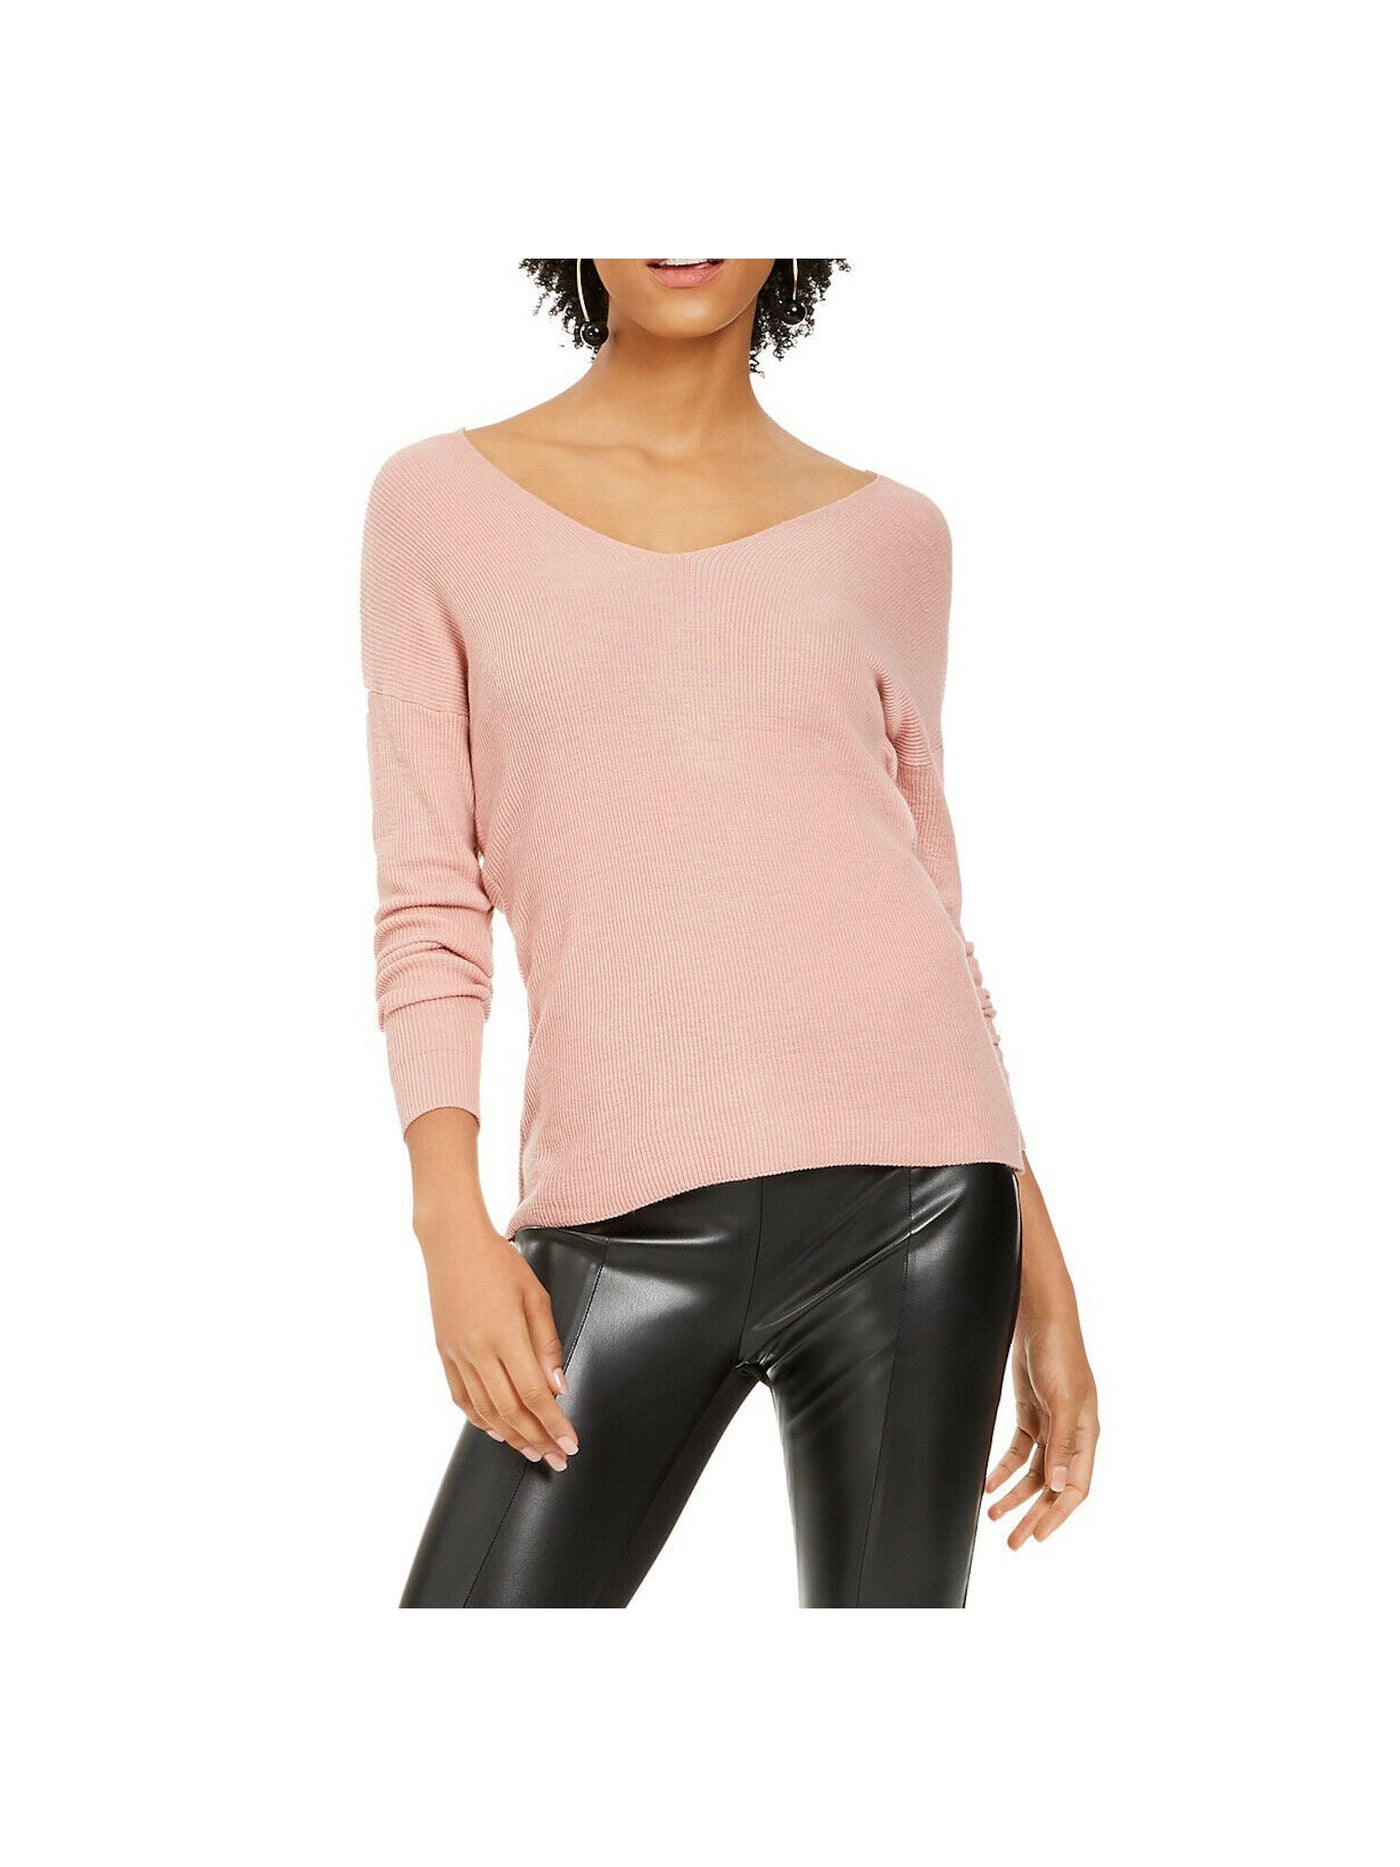 BAR III Womens Pink Low Back Long Sleeve Scoop Neck Sweater Size: L